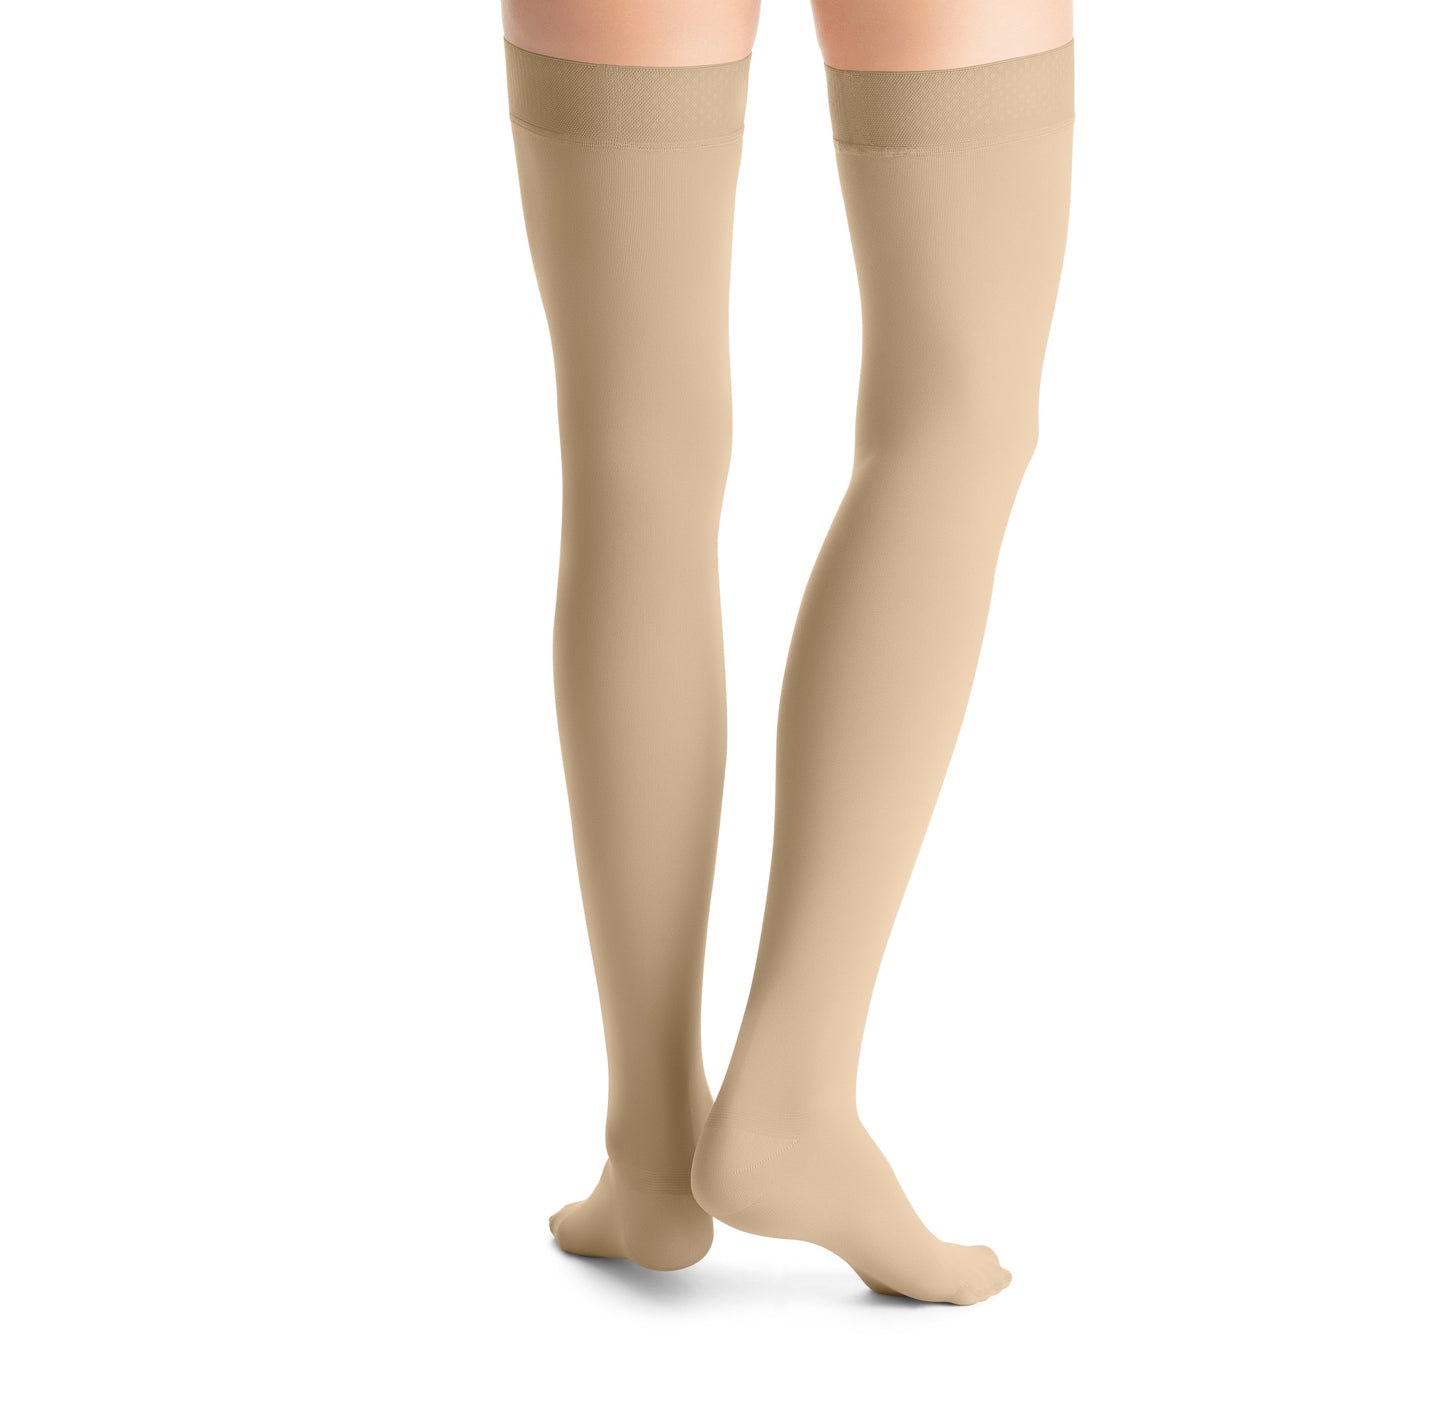 JOBST Opaque Compression Stockings 15-20 mmHg Thigh High Sensitive Band Closed Toe